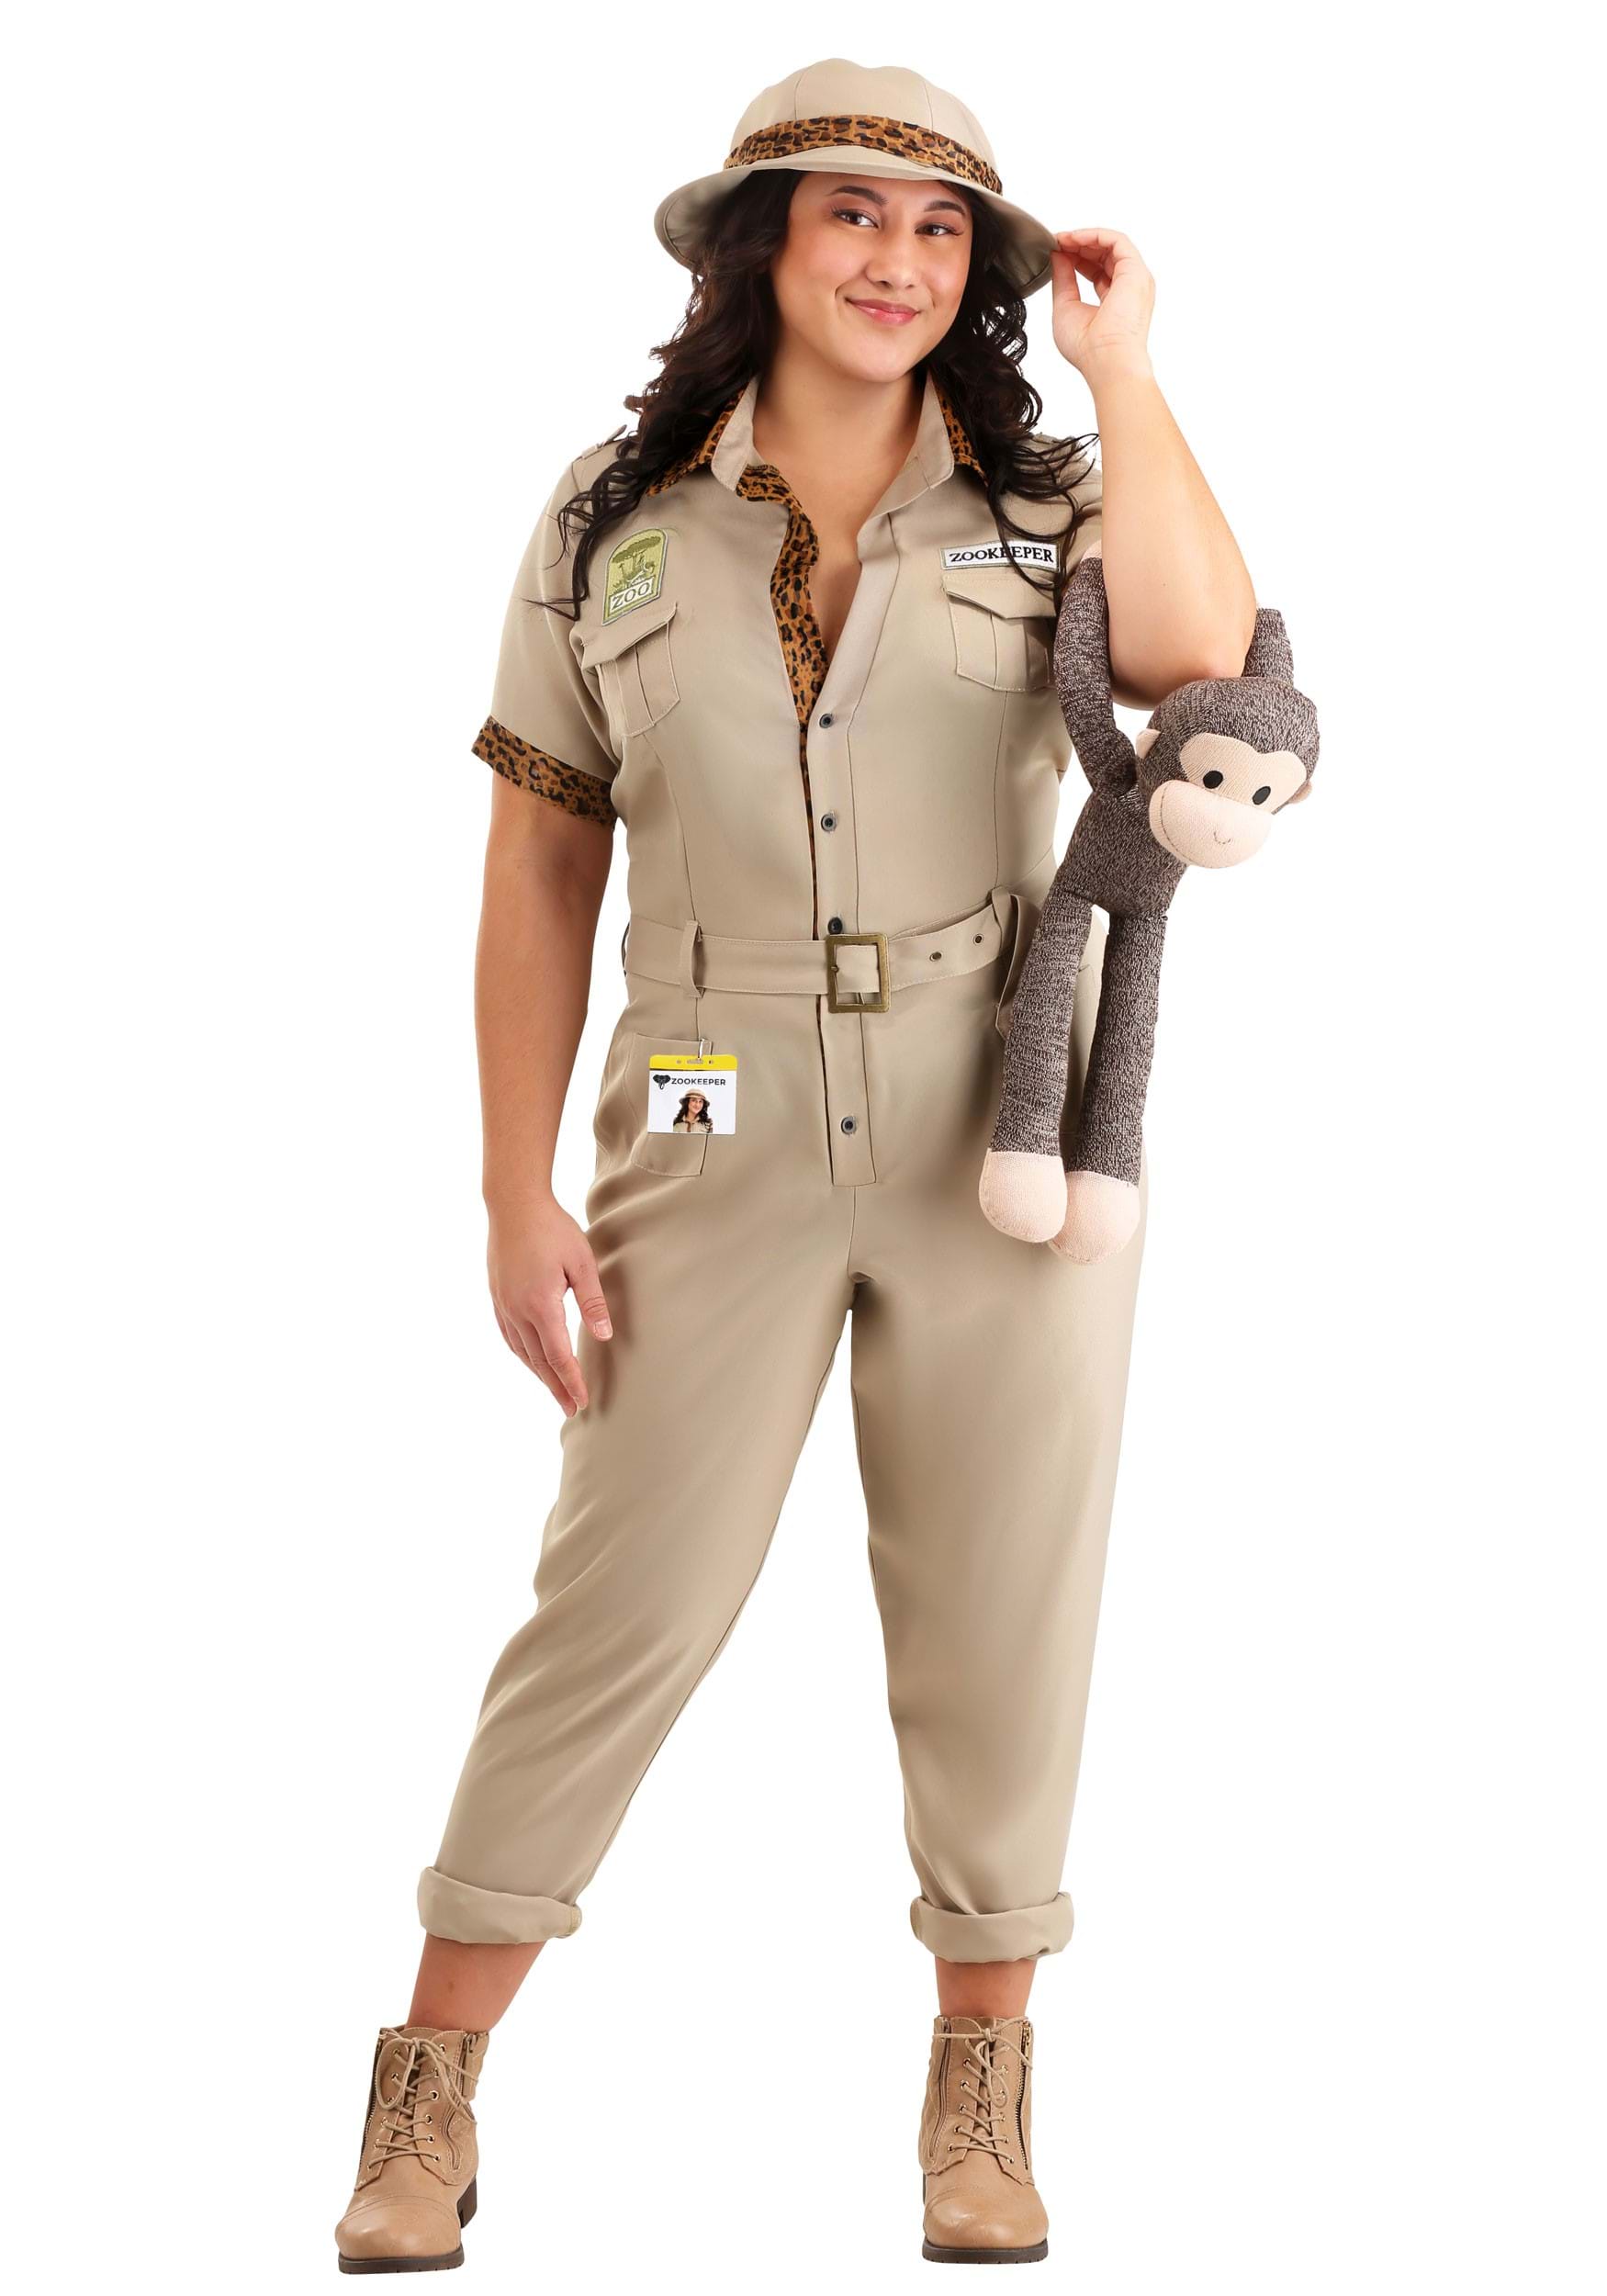 Plus Size Zookeeper Costume for Women